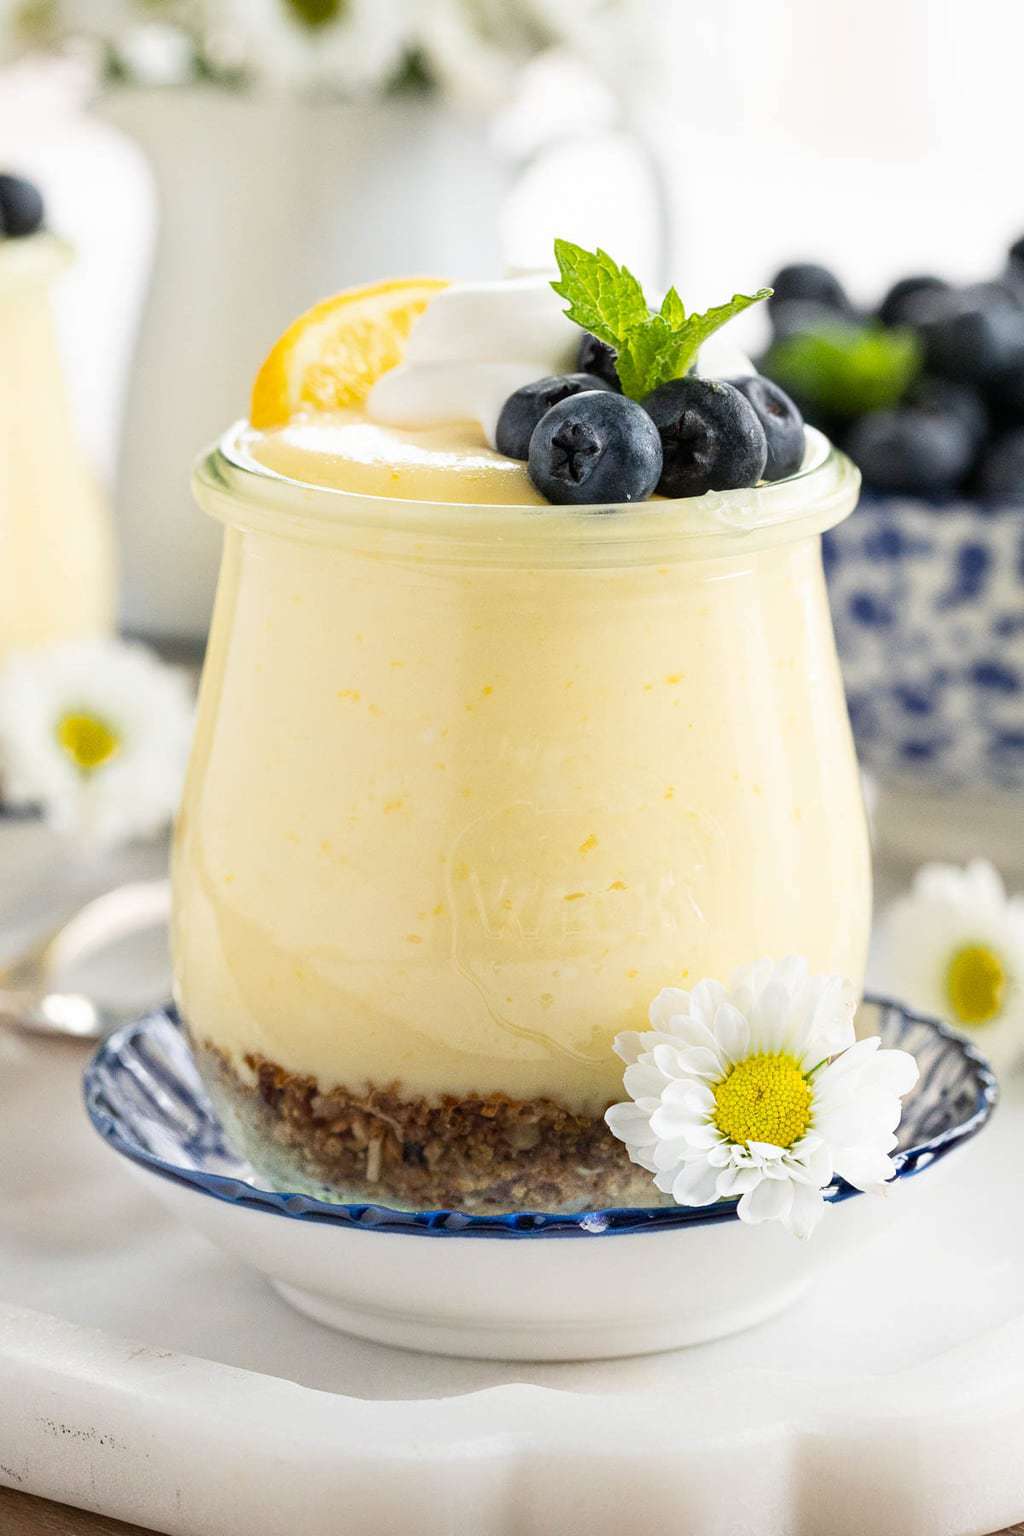 Photo of a glass Weck jar filled with Easy Lemon Curd Mousse.